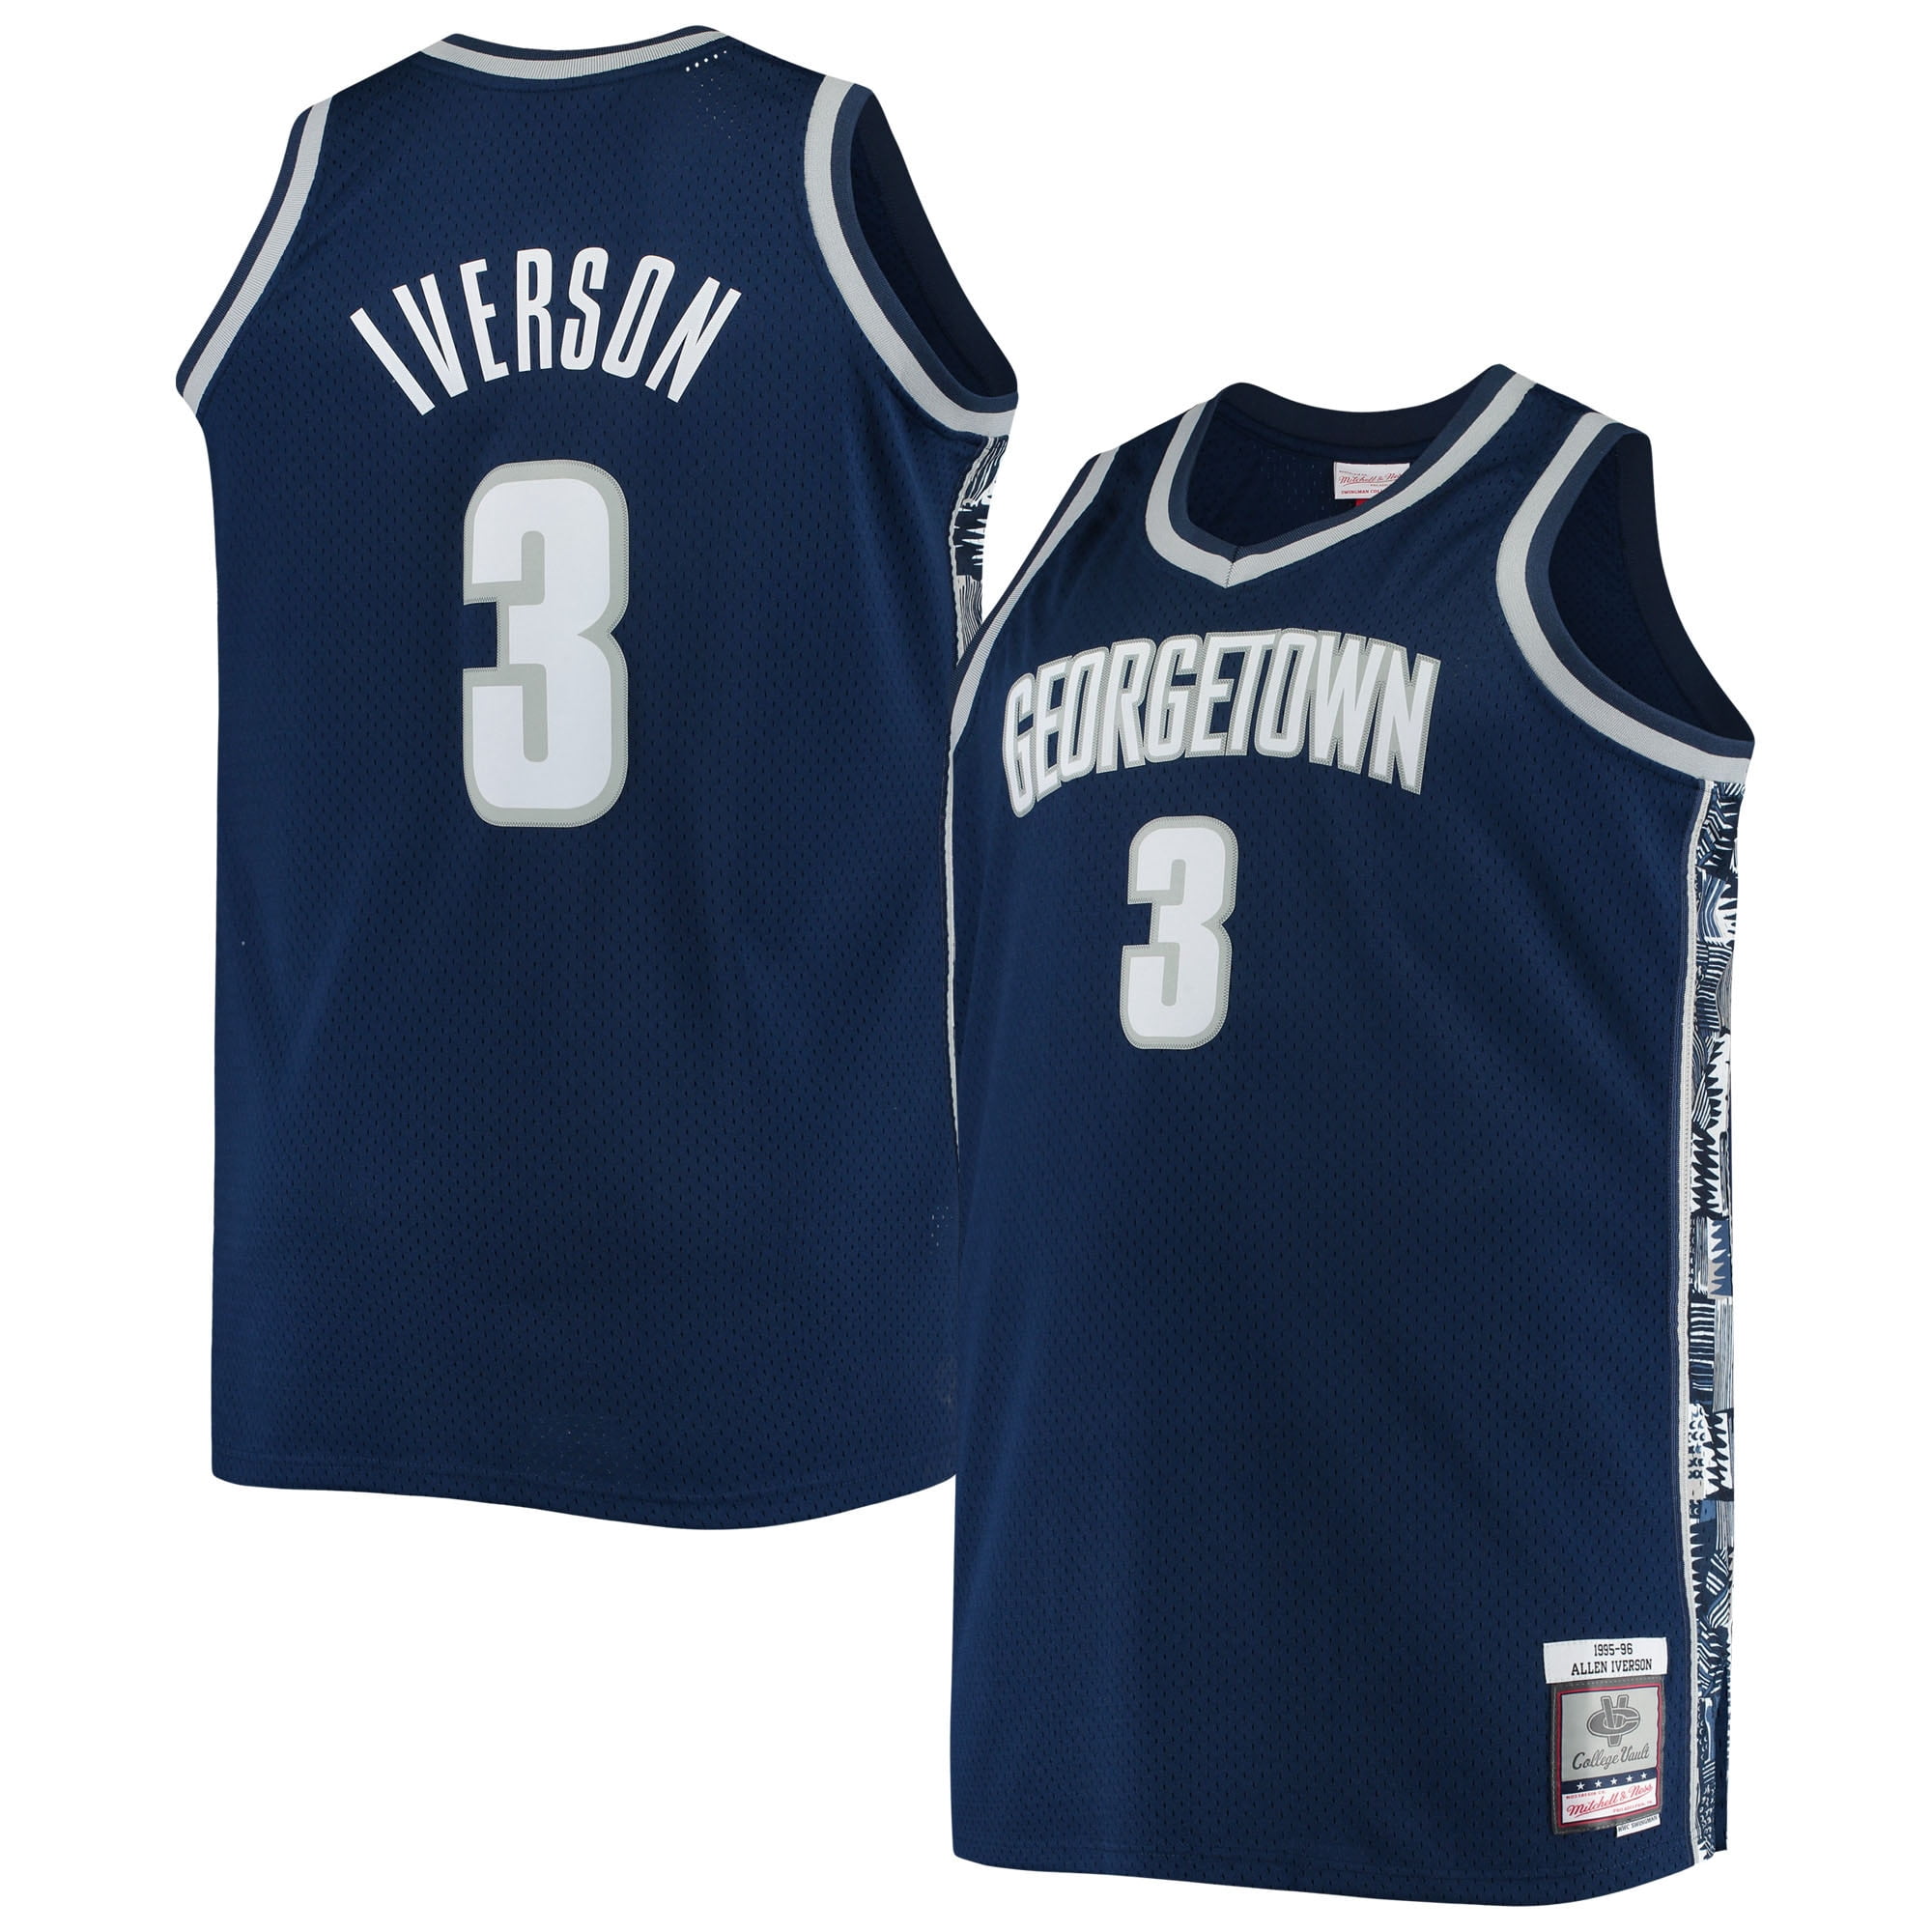 Allen Iverson Gray Georgetown Hoyas Autographed 1995-96 Mitchell & Ness  Replica Jersey